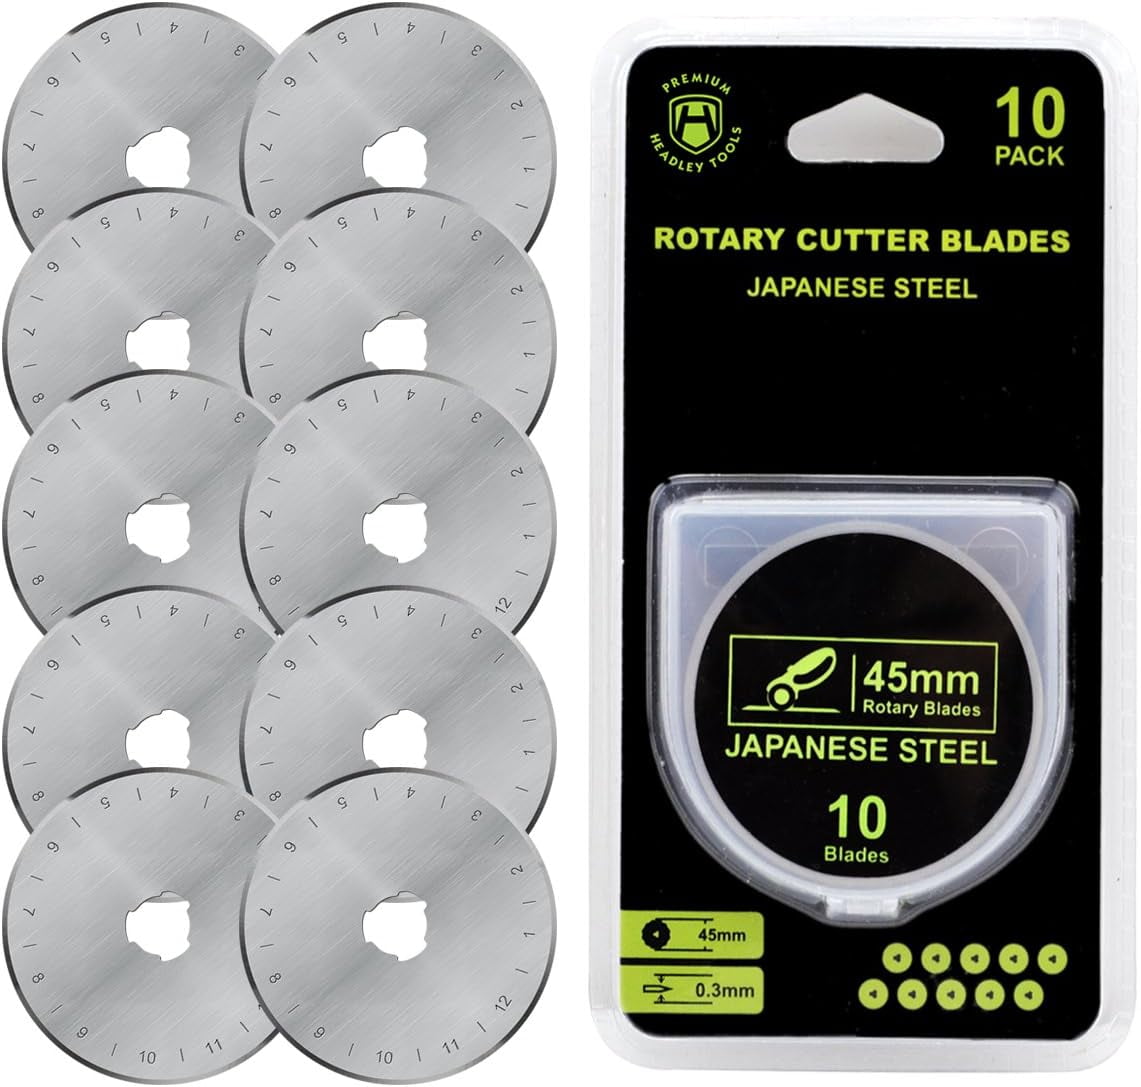 5 Pack 45mm Rotary Cutter Blades Skip Blade Perforator Rotary Cutter Blades  Fits Olfa for Paper Crochet Edge Projects - AliExpress